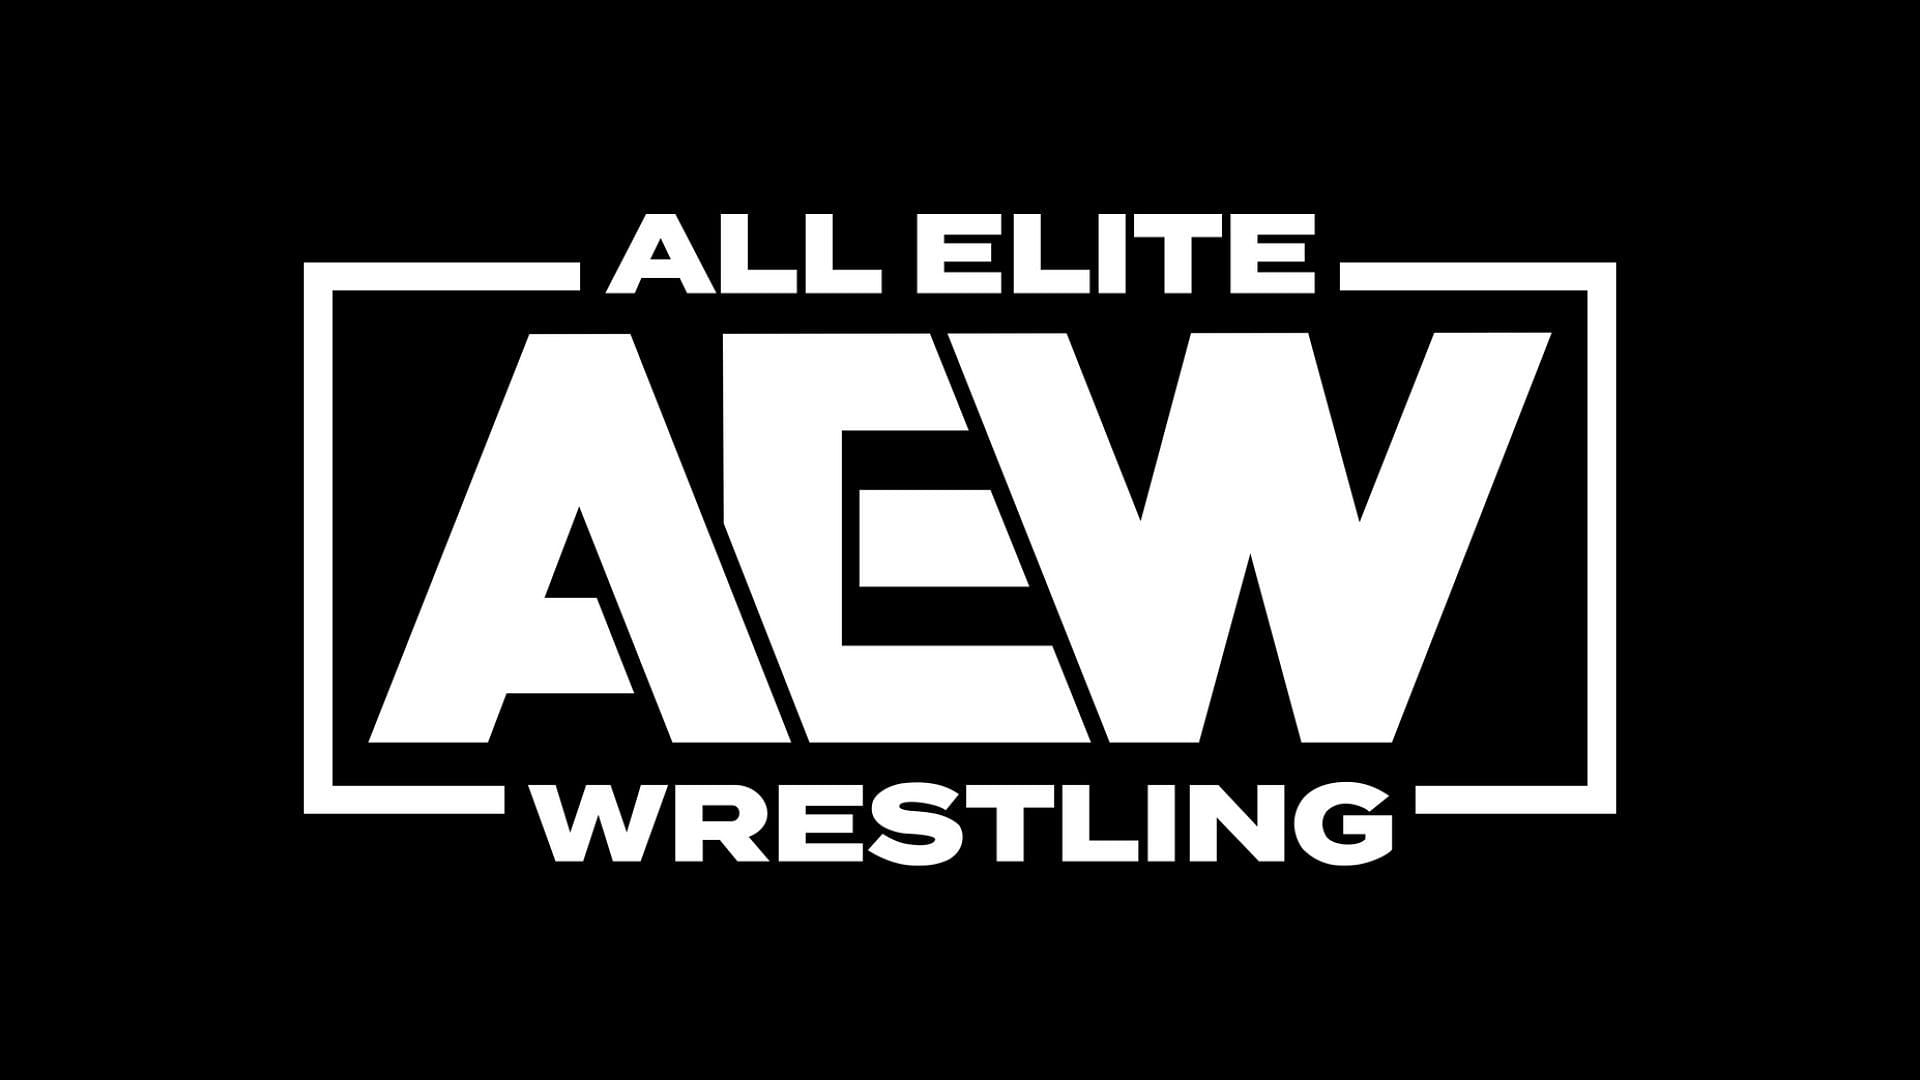 Could AEW simply be a fun project for Tony Khan?